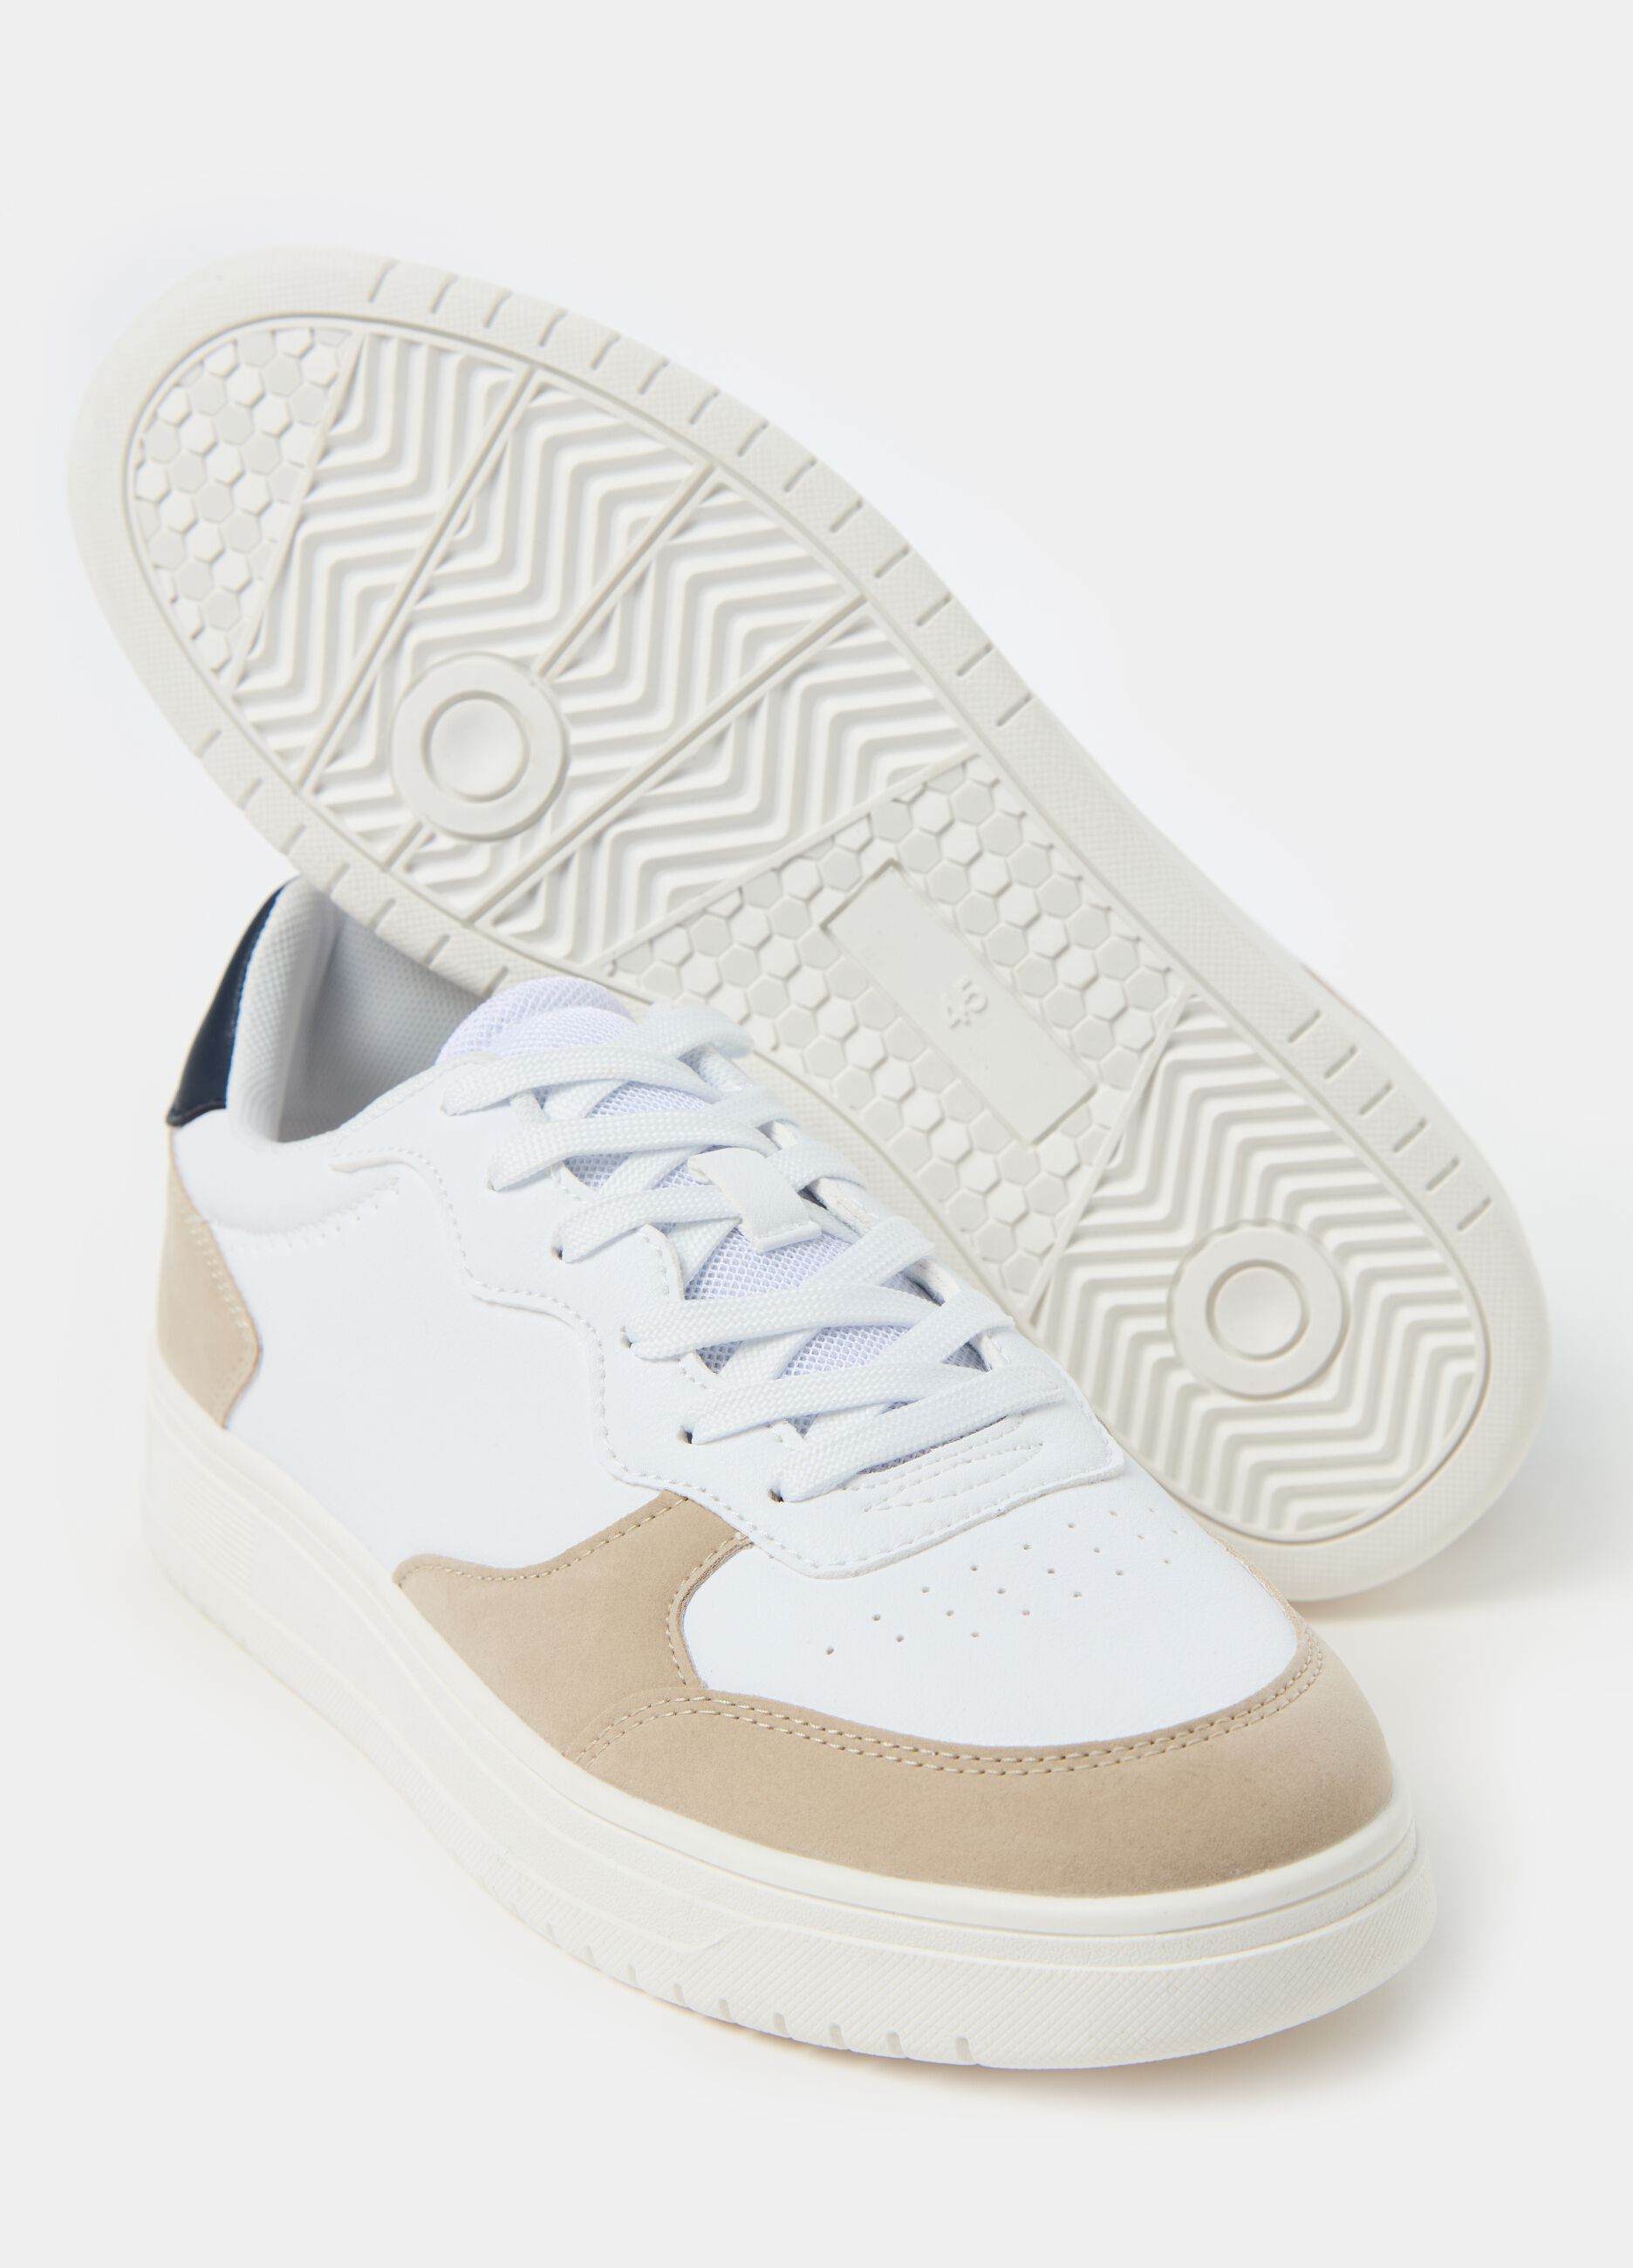 Two-tone sneakers